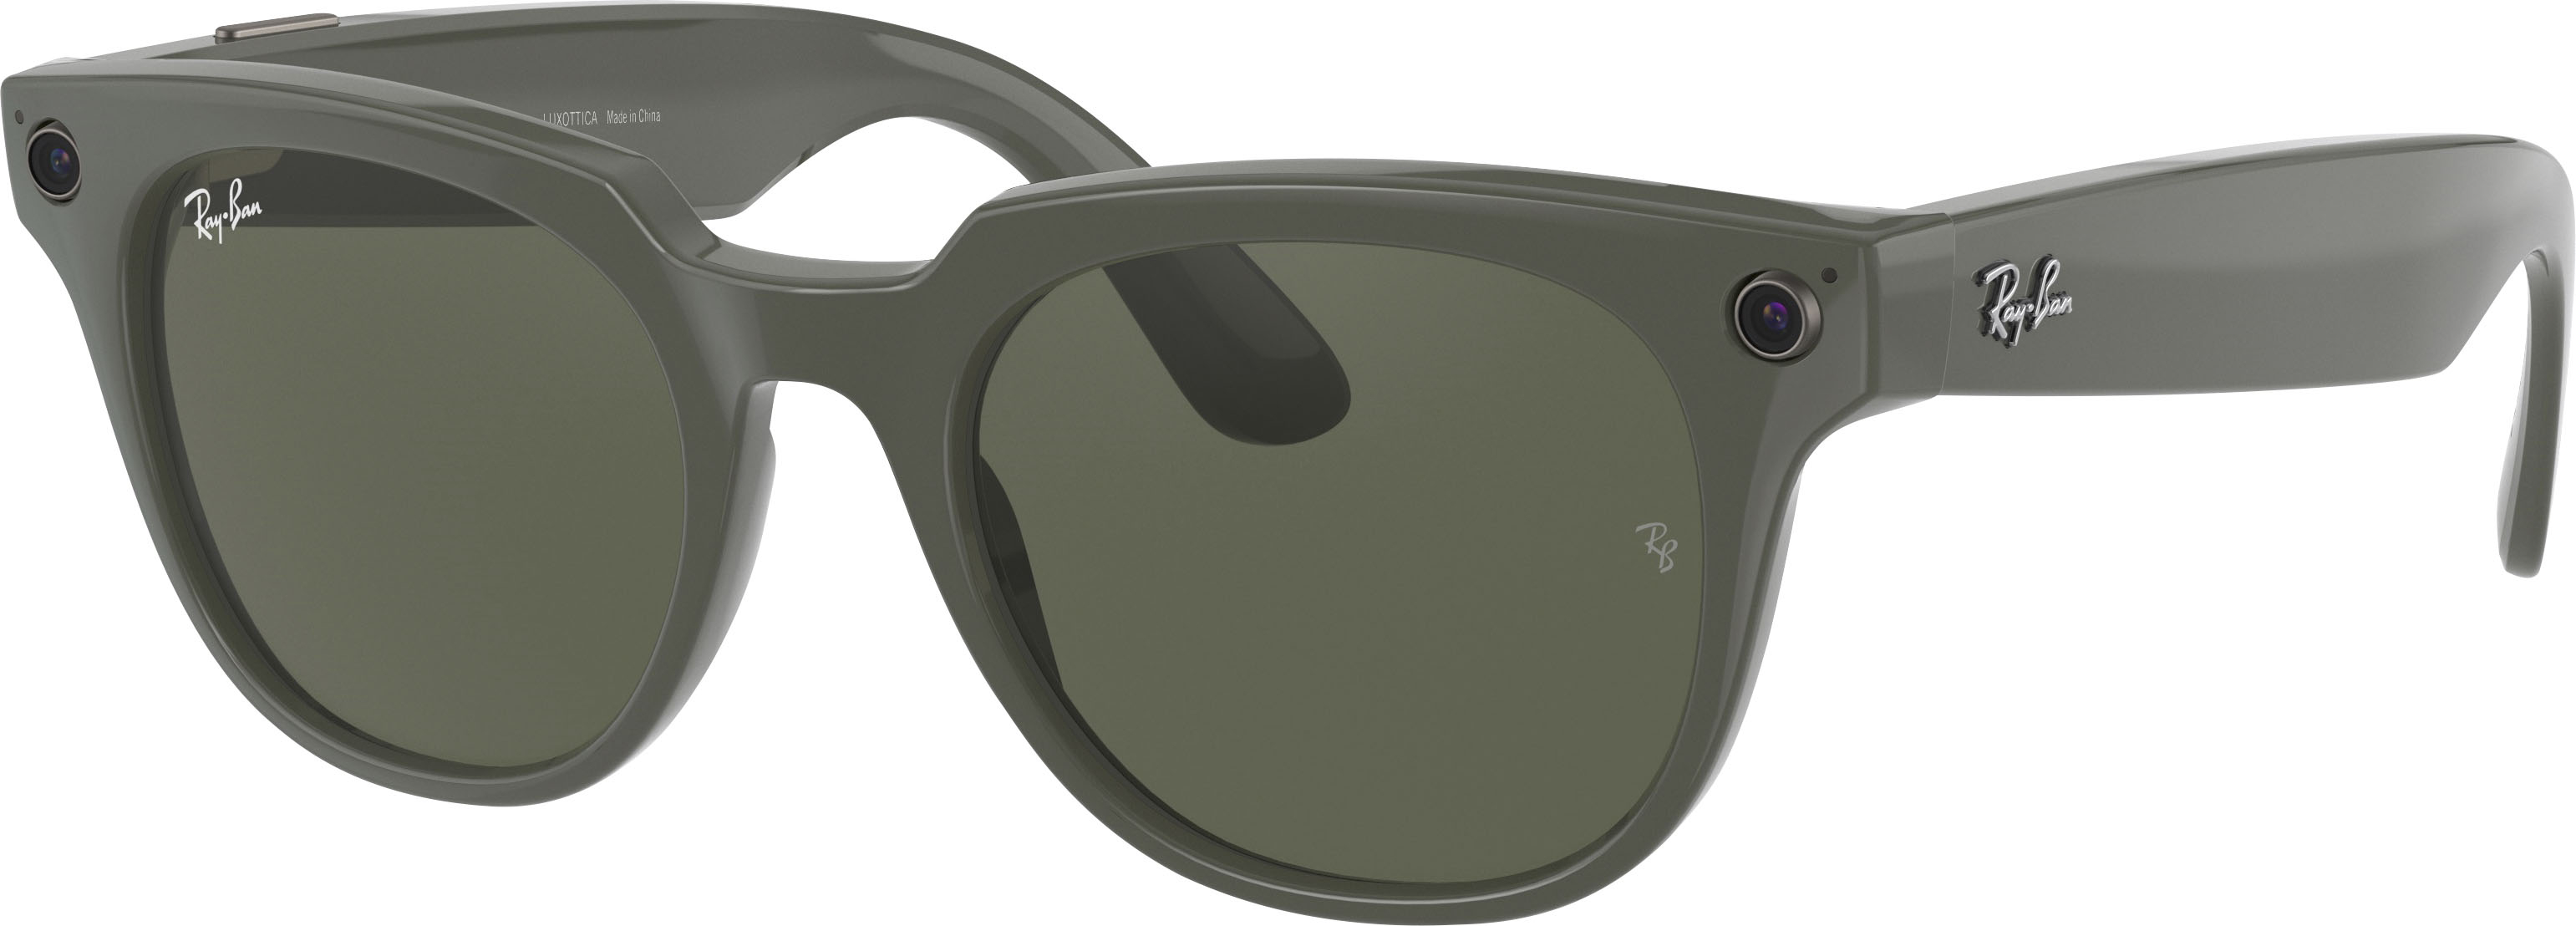 Customer Reviews: Ray-Ban Stories Meteor Smart Glasses Shiny Olive/ Transitions G-15 Green 0RW40056563M351 - Best Buy